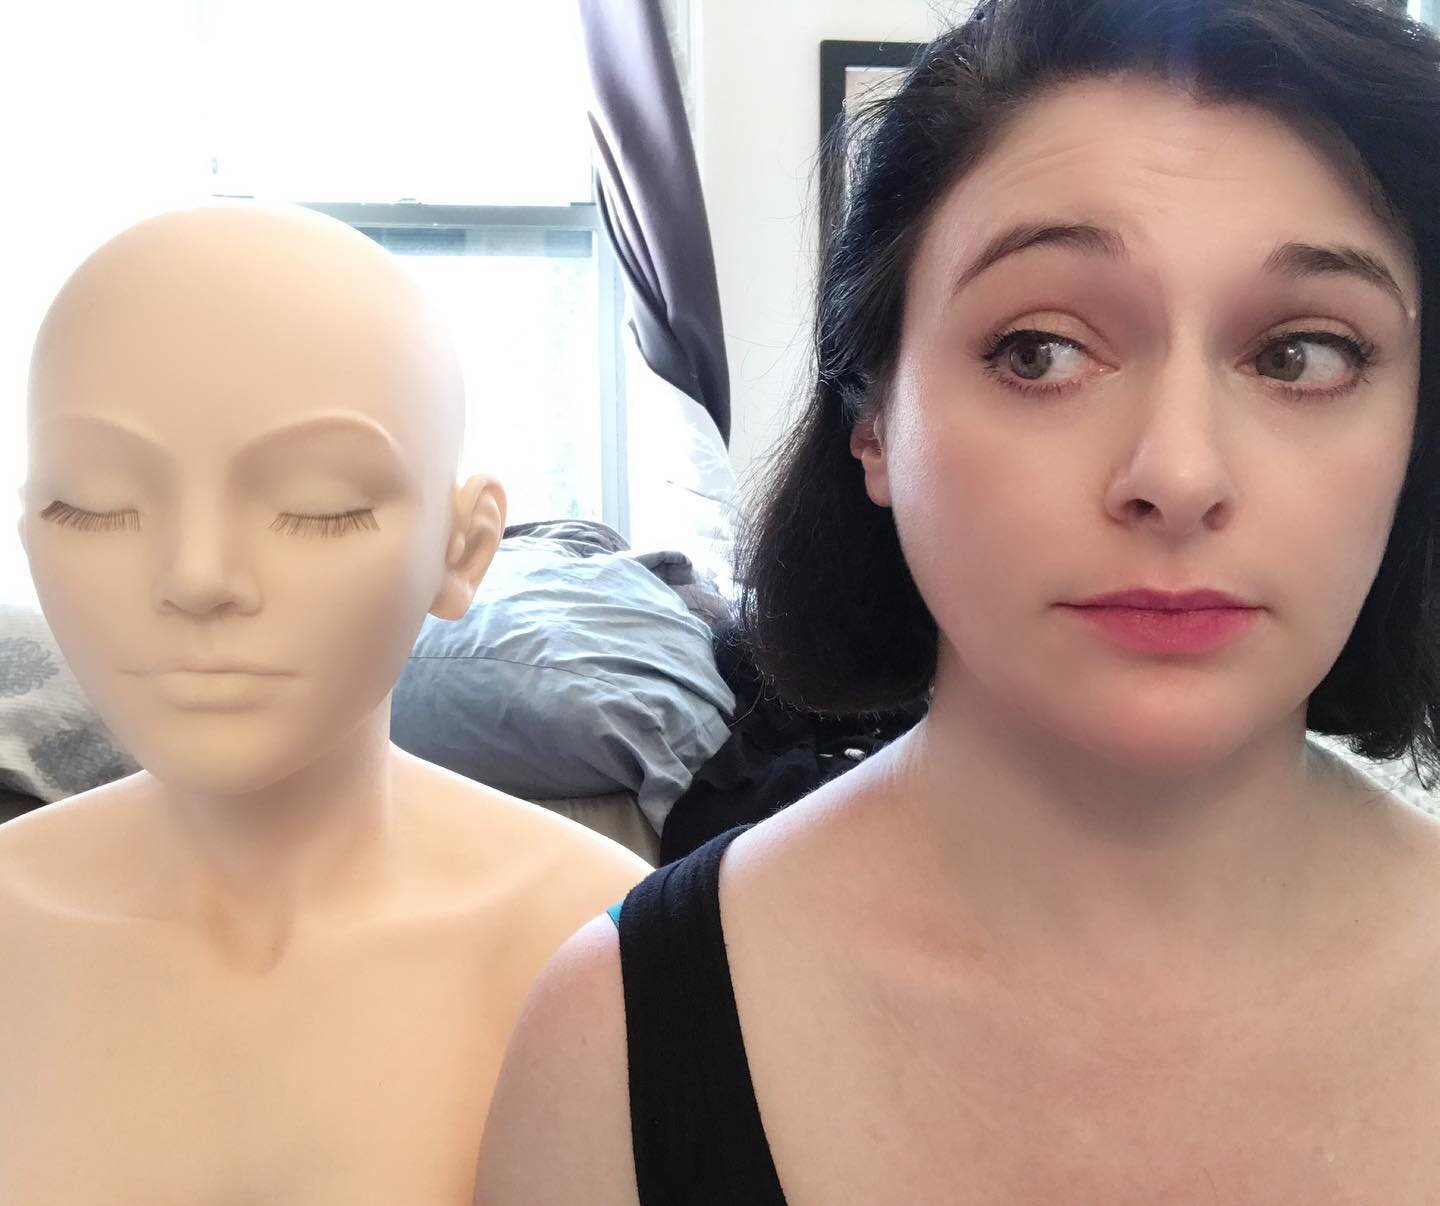 This is Becky, because she&rsquo;s extra. Due to COVID-19 New York State&rsquo;s licensing board isn&rsquo;t requiring us to bring in human models, instead we will have to provide mannequins to to complete the practical portion of the licensing exam.